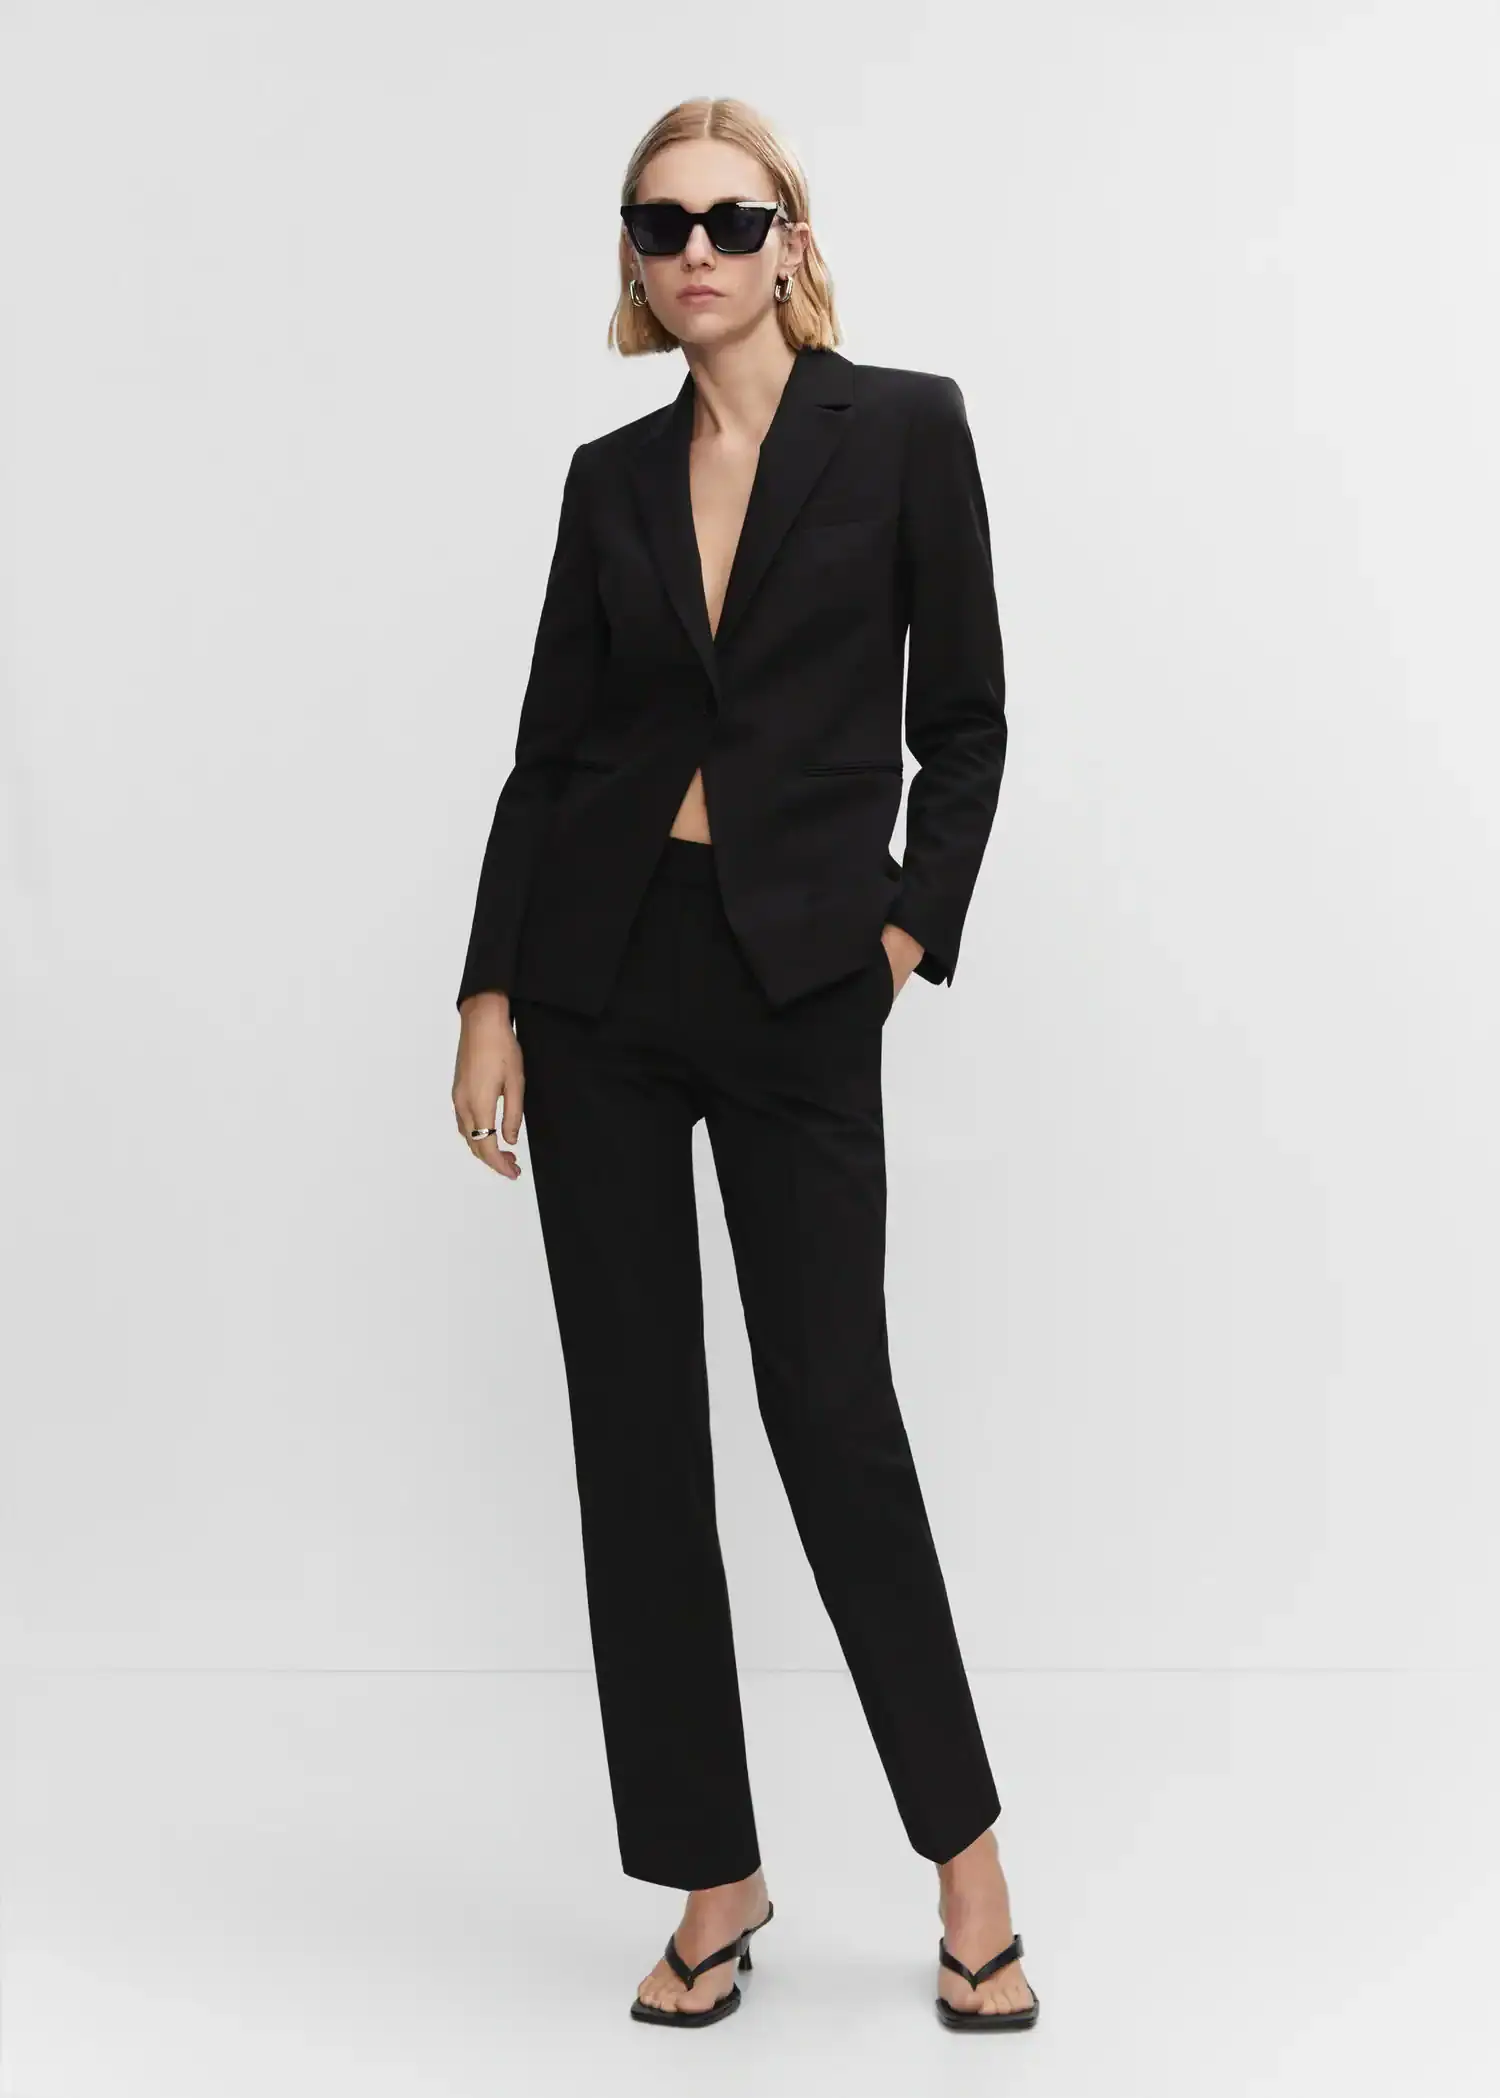 Mango Fitted suit jacket. a woman in a black suit standing in front of a white wall. 